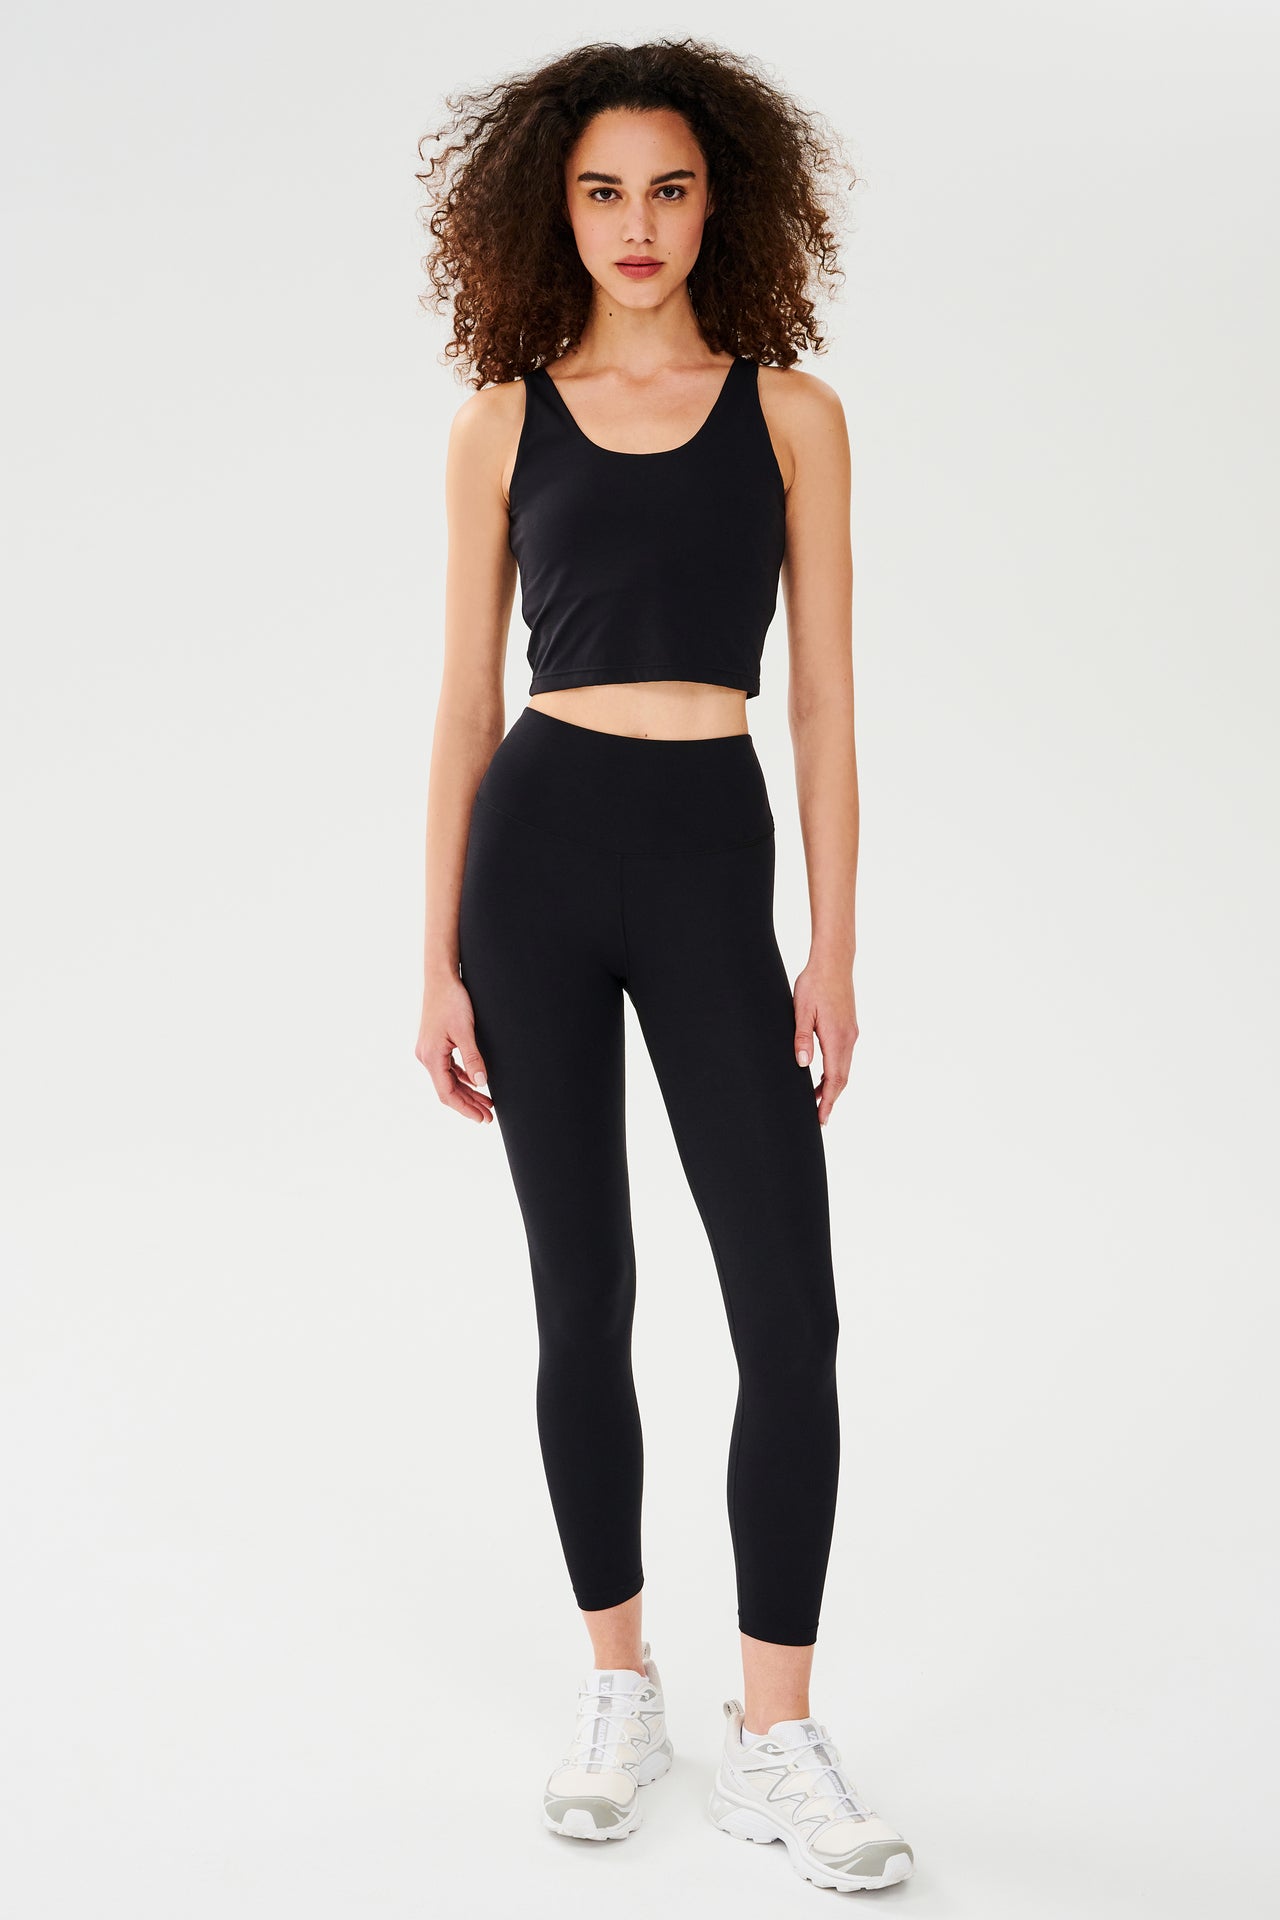 Full front view of woman with dark curly hair wearing high waist  black leggings with ankle cut and black bra tank paired with white shoes